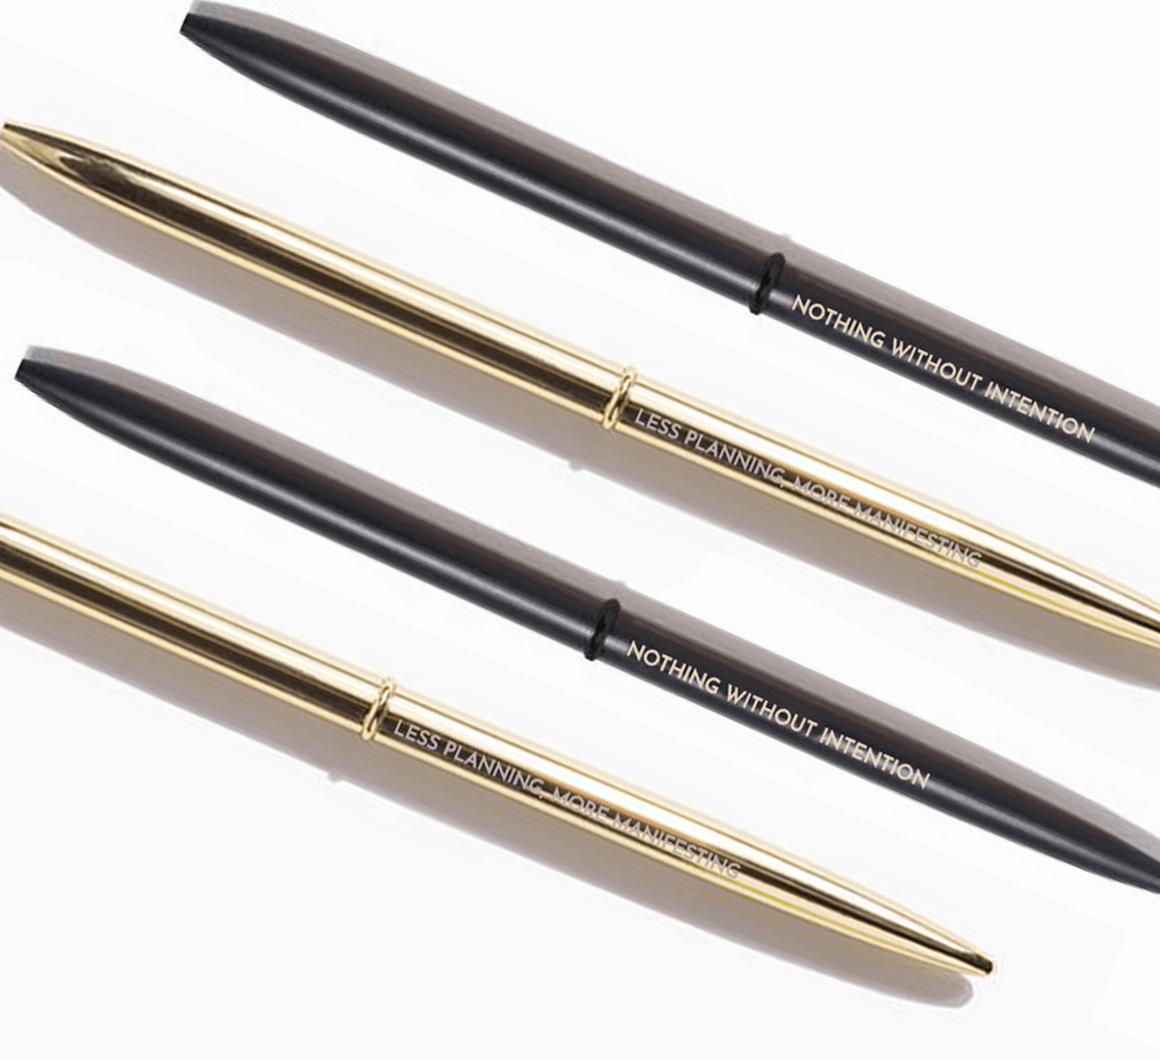 slim refillable pens that come in gold and black